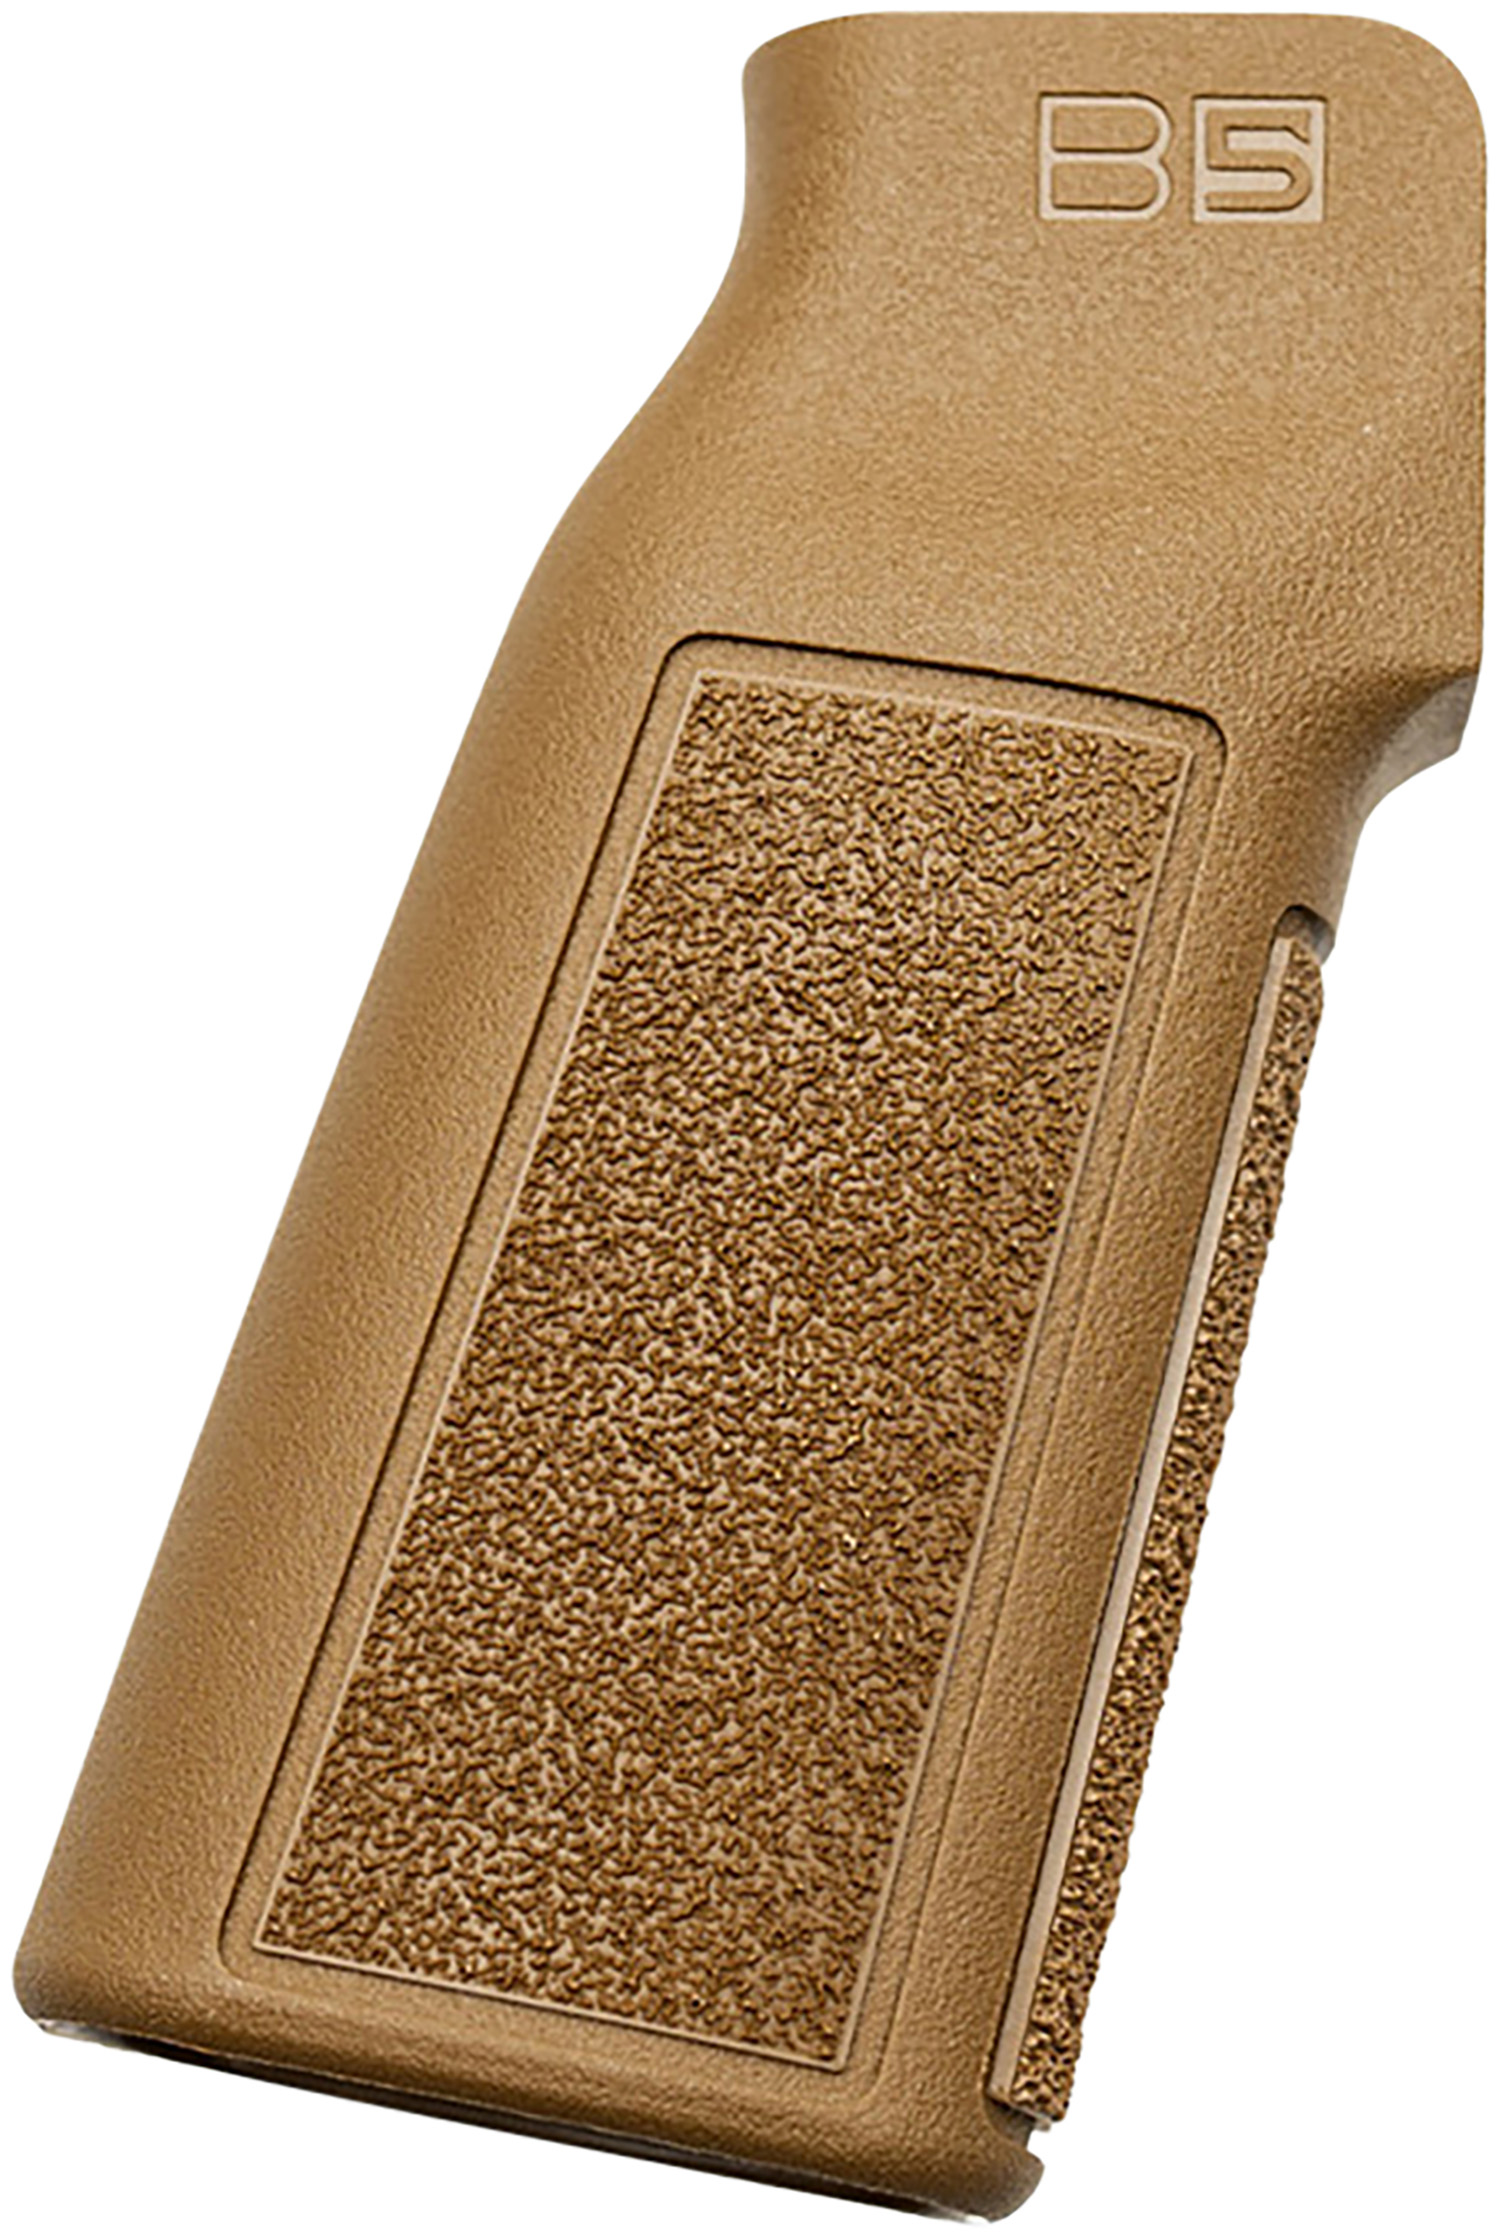 B5 Systems PGR1454 Type 22 P-Grip Coyote Brown Aggressive Textured Polymer, Increased Vertical Grip Angle, Fits AR-Platf